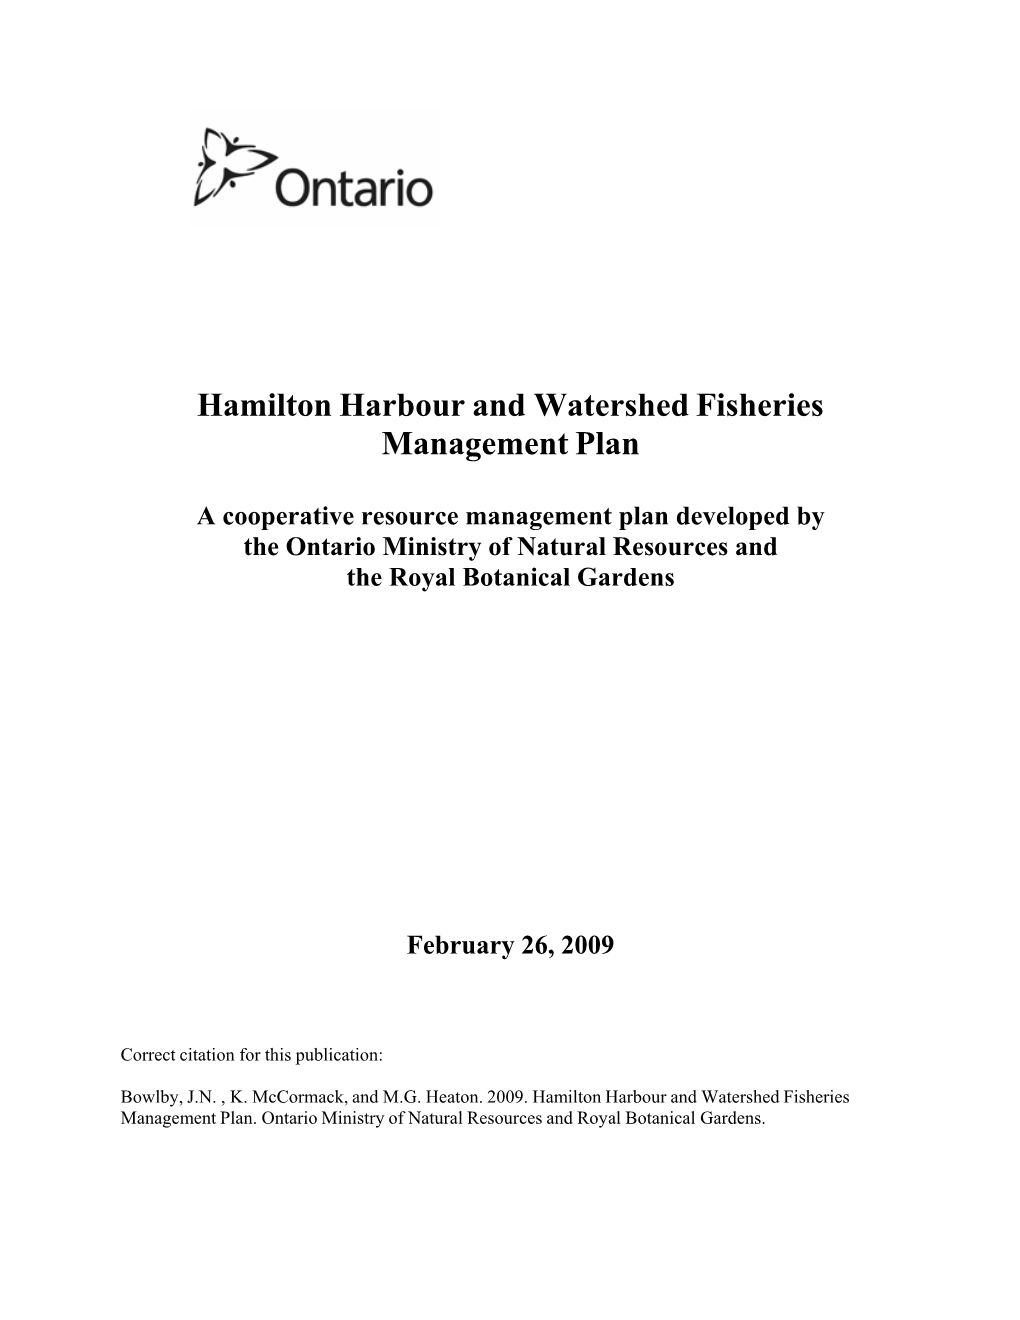 Hamilton Harbour and Watershed Fisheries Management Plan